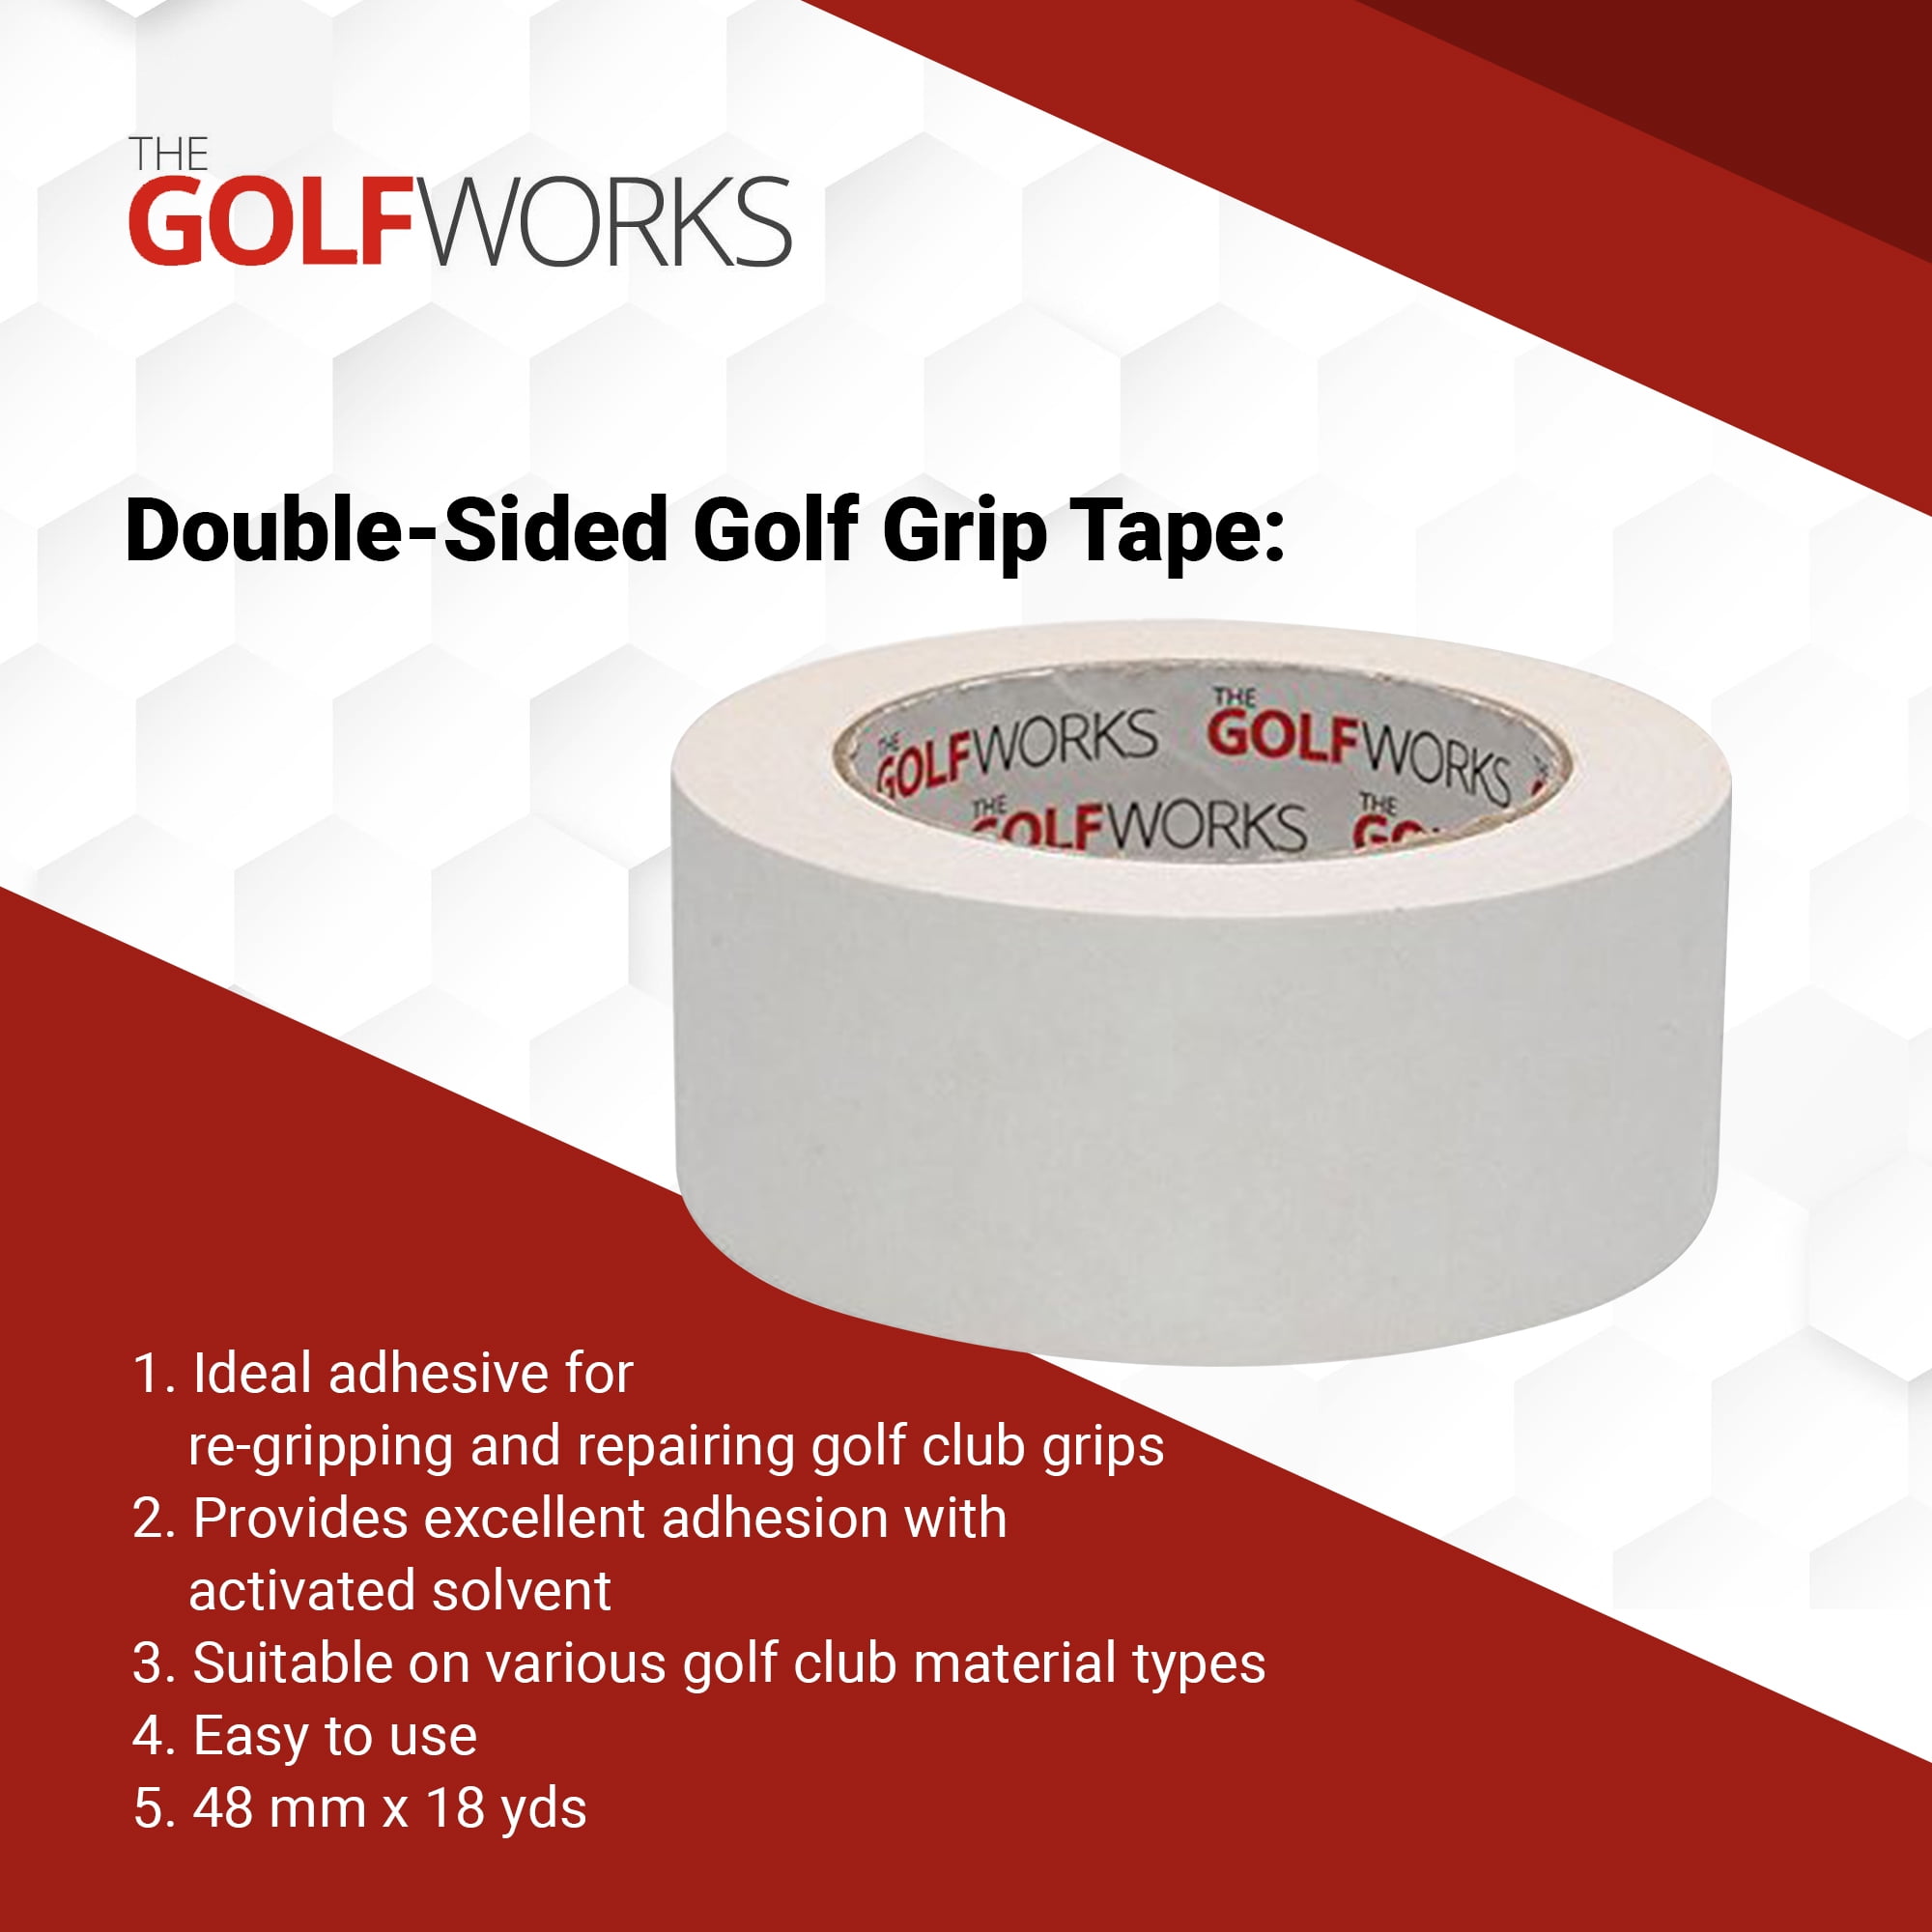 GW Full Size Paper Build Up Tape - The GolfWorks